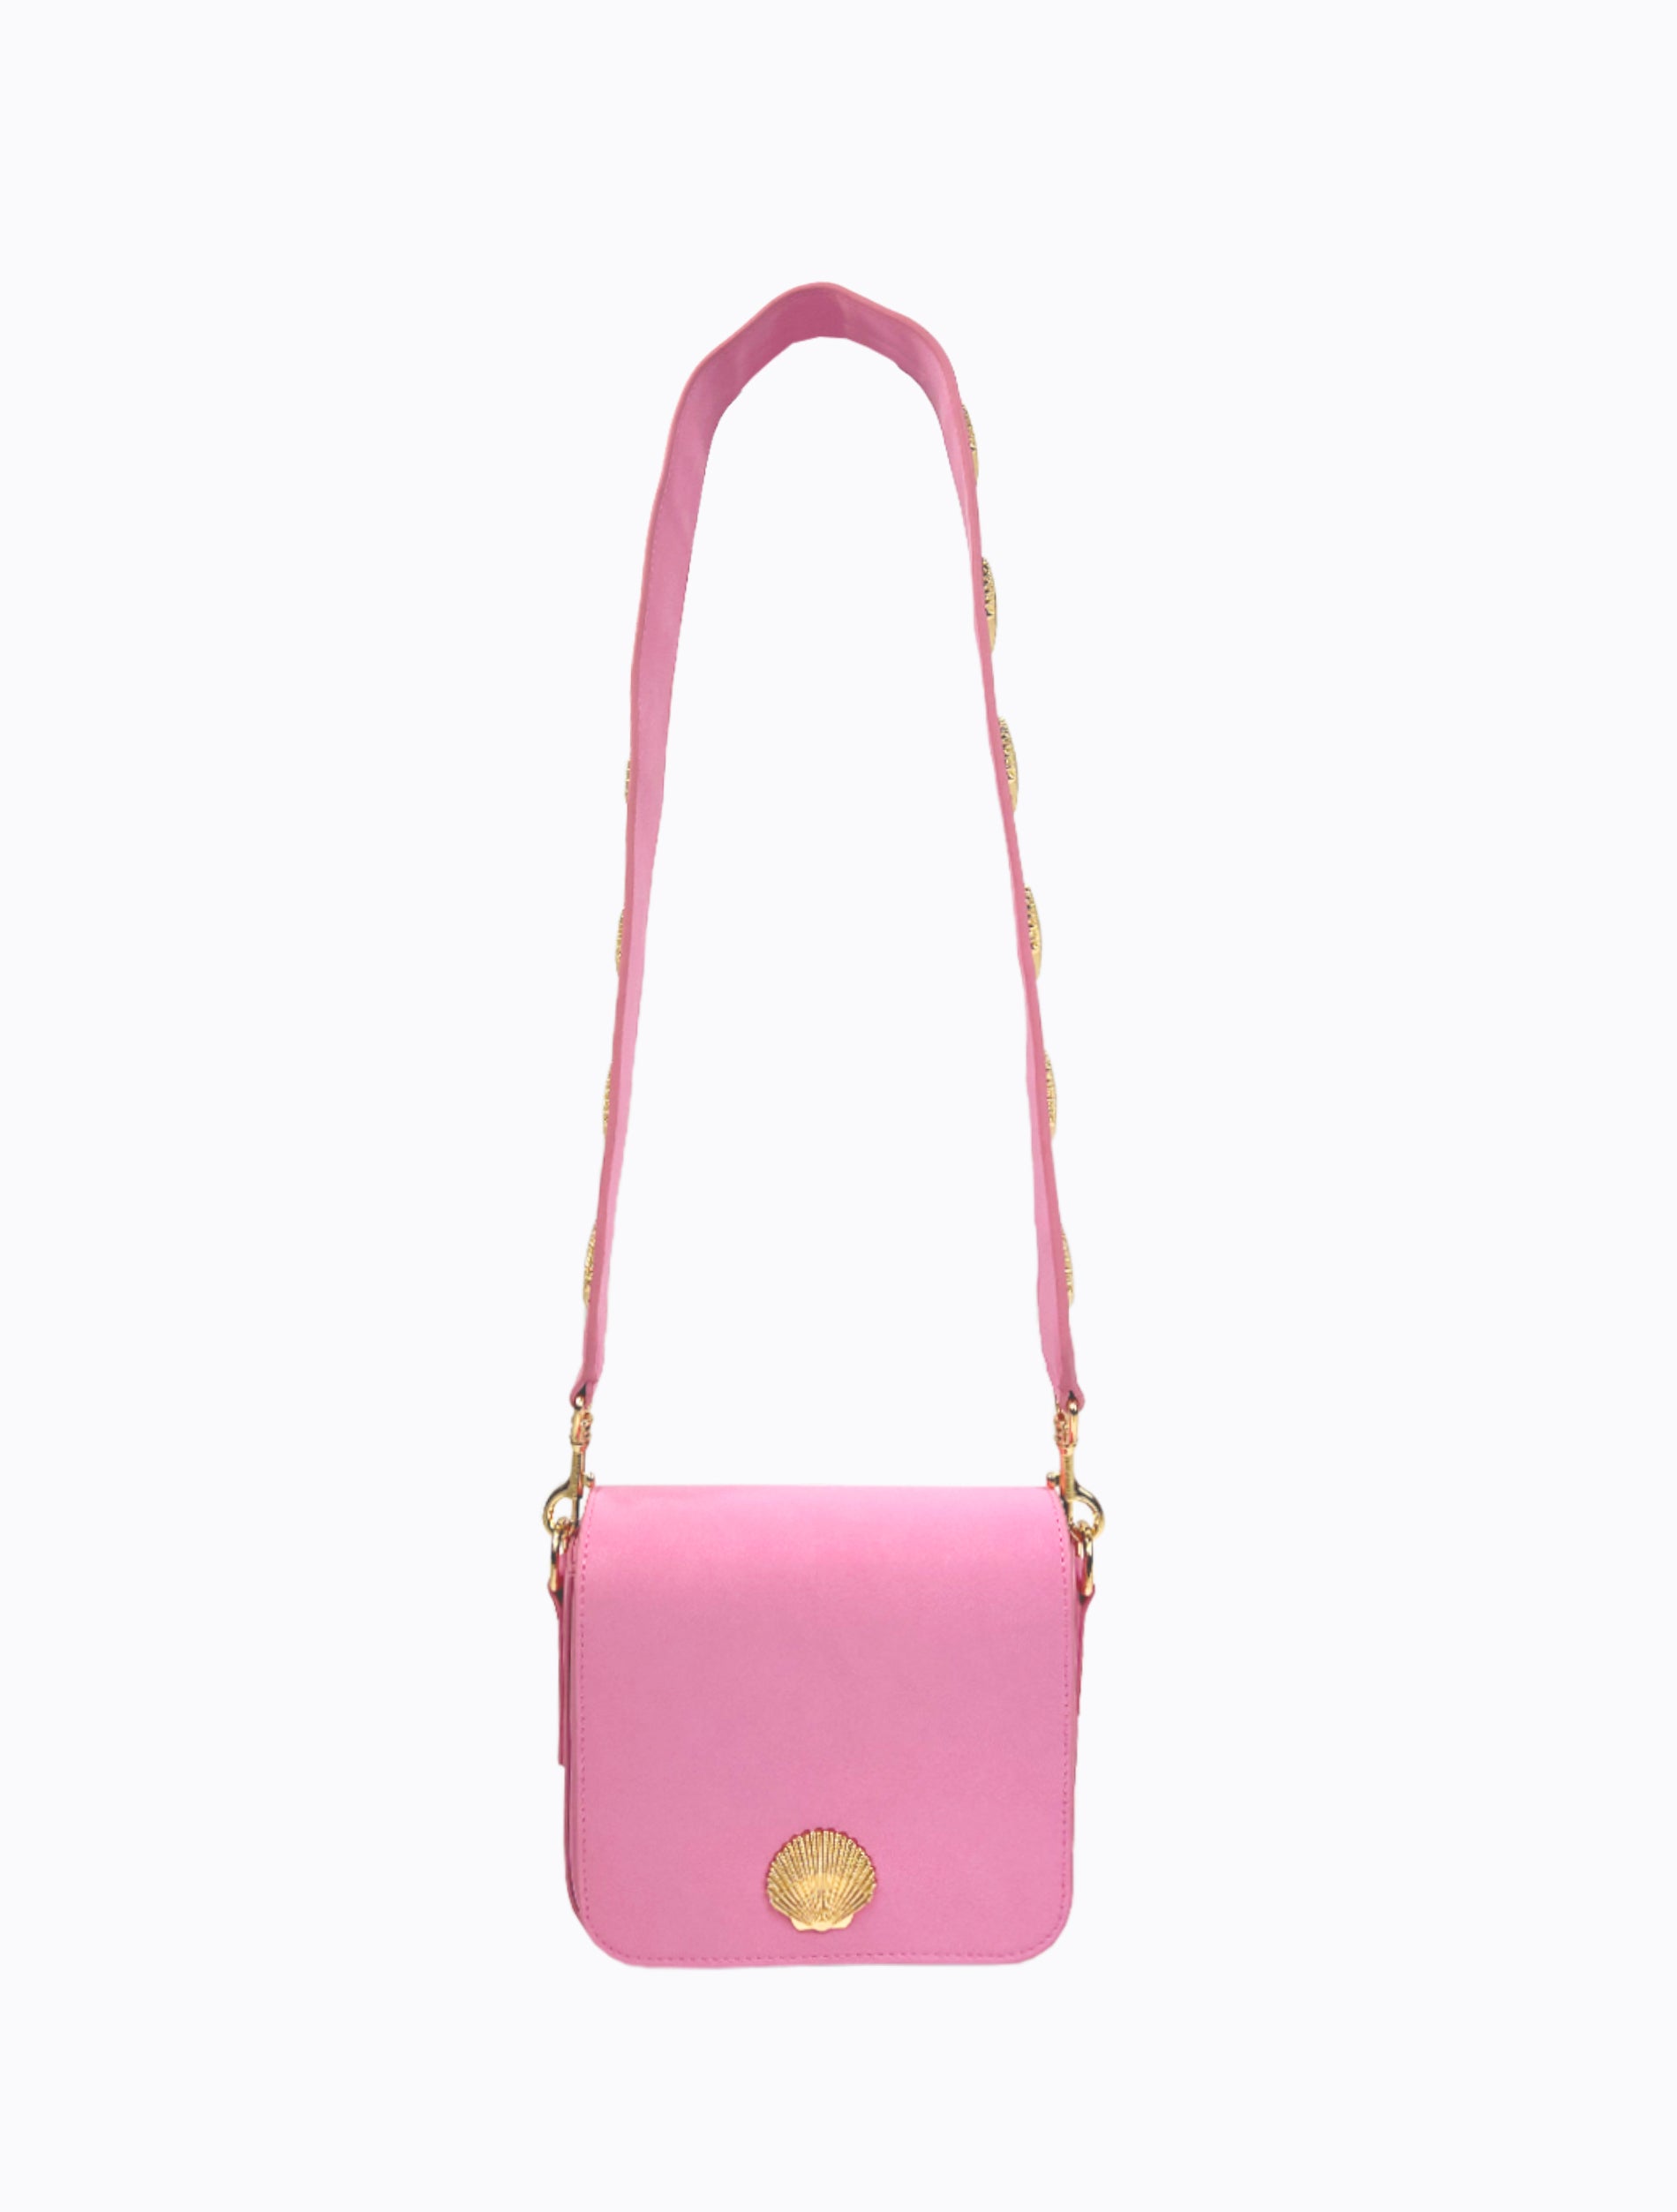 South Beach Shell Shoulder Bag - Pink – Poppy Lissiman